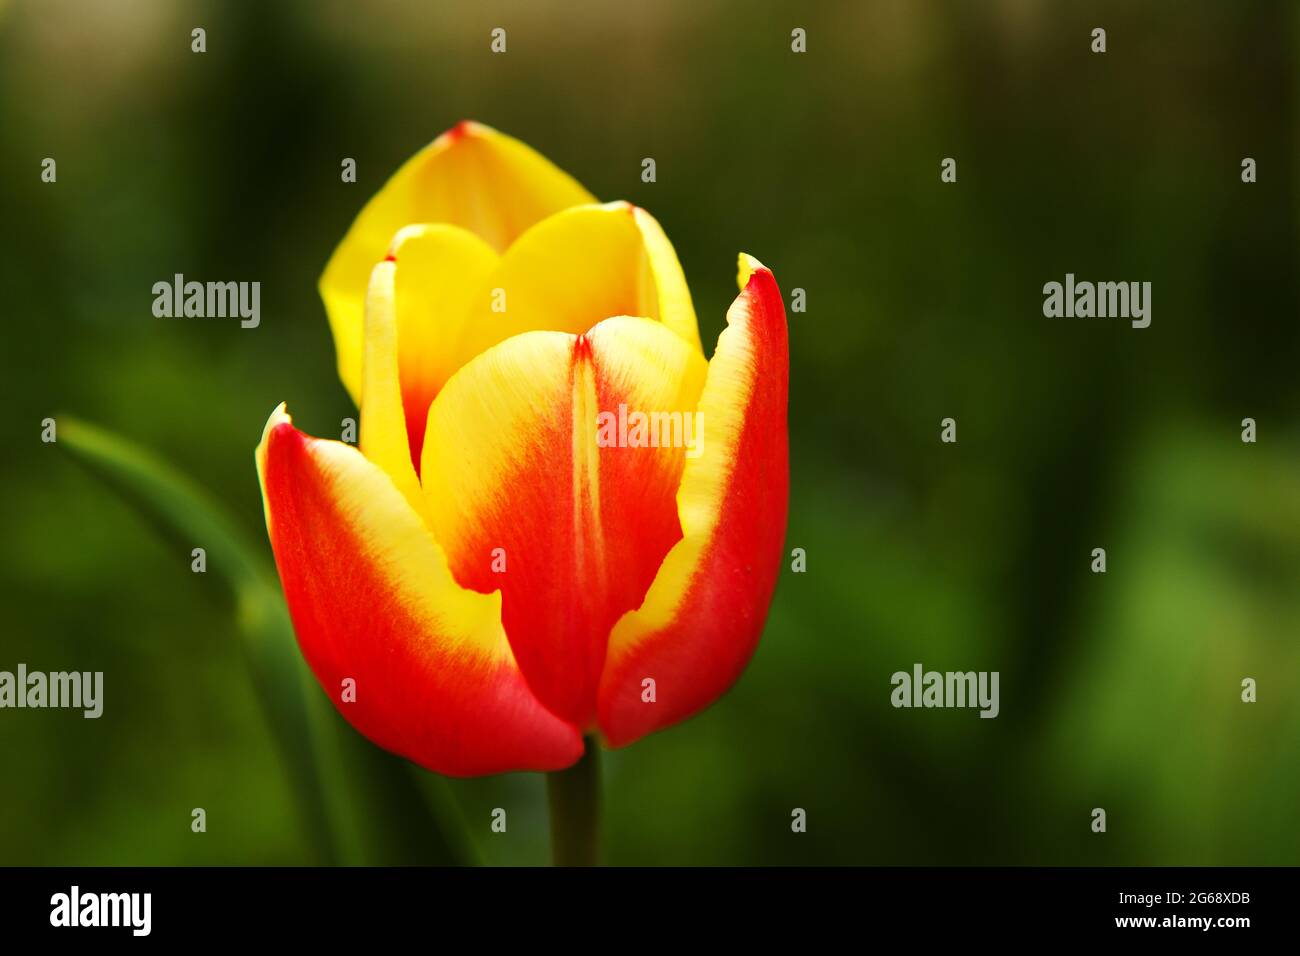 Beautiful Red'n Yellow Tulip on Blurred Green Background Stock Photo